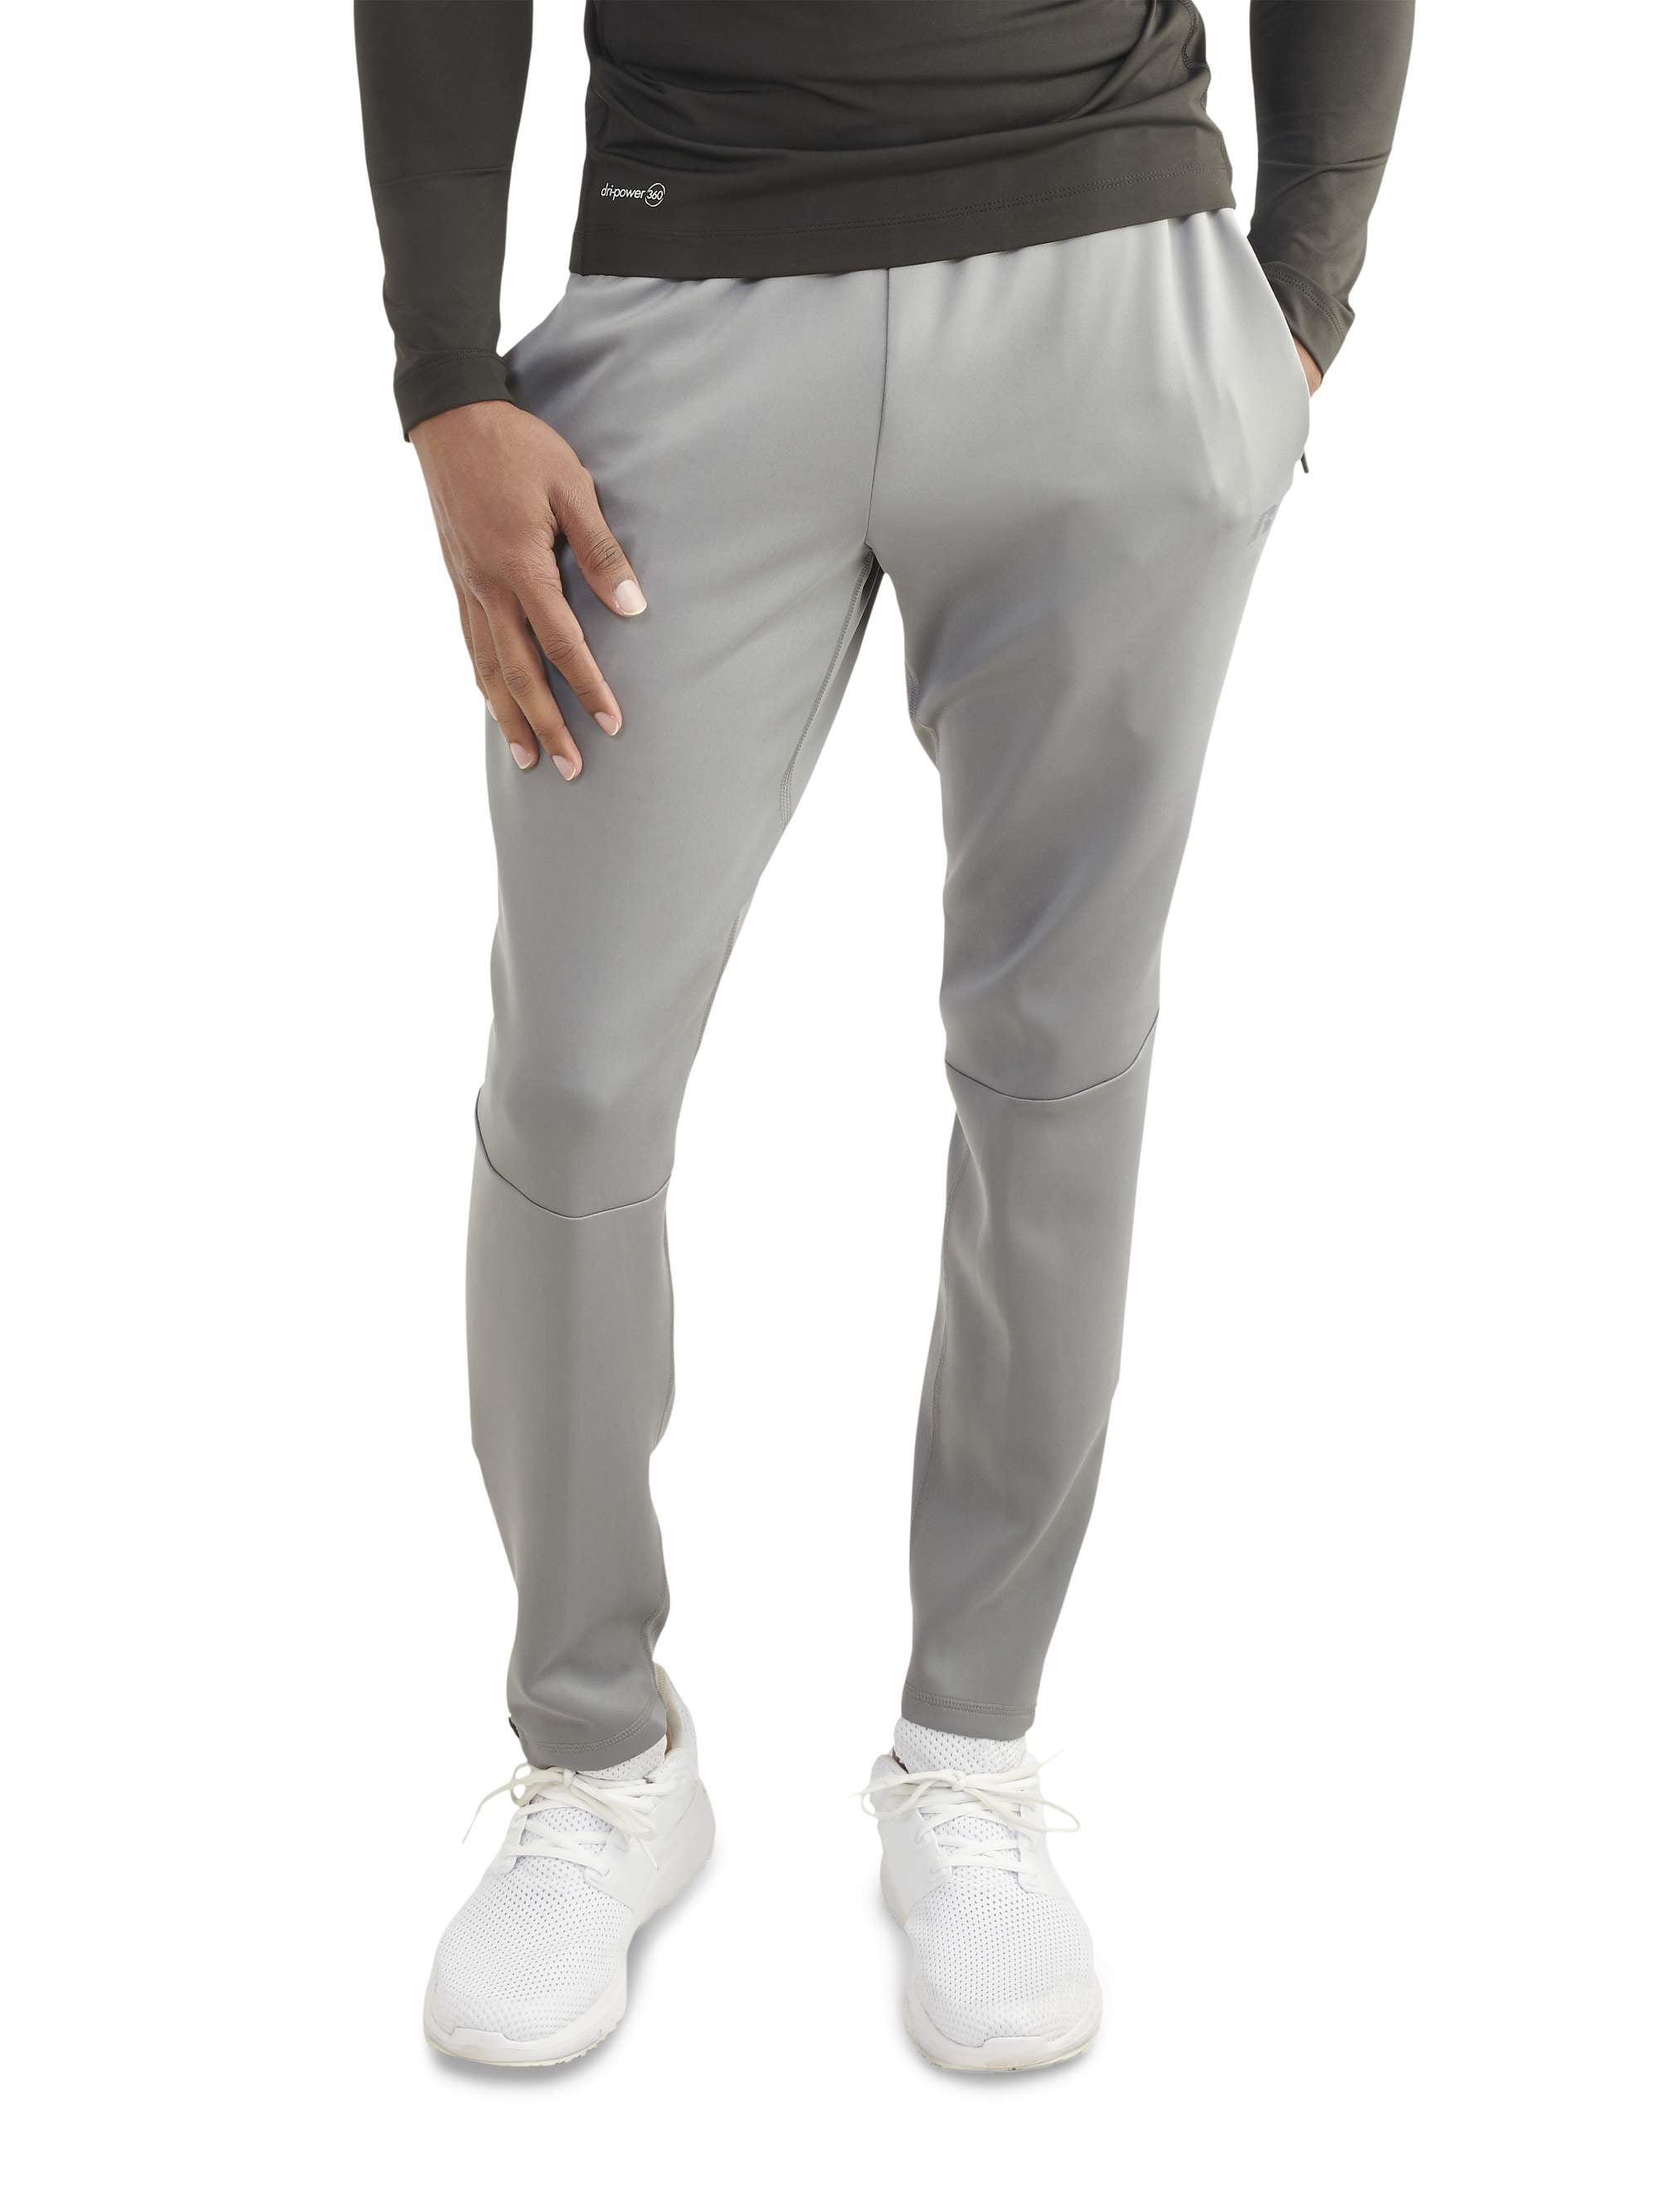 Russell Mens Boot Cut Game Baseball Pants White M 